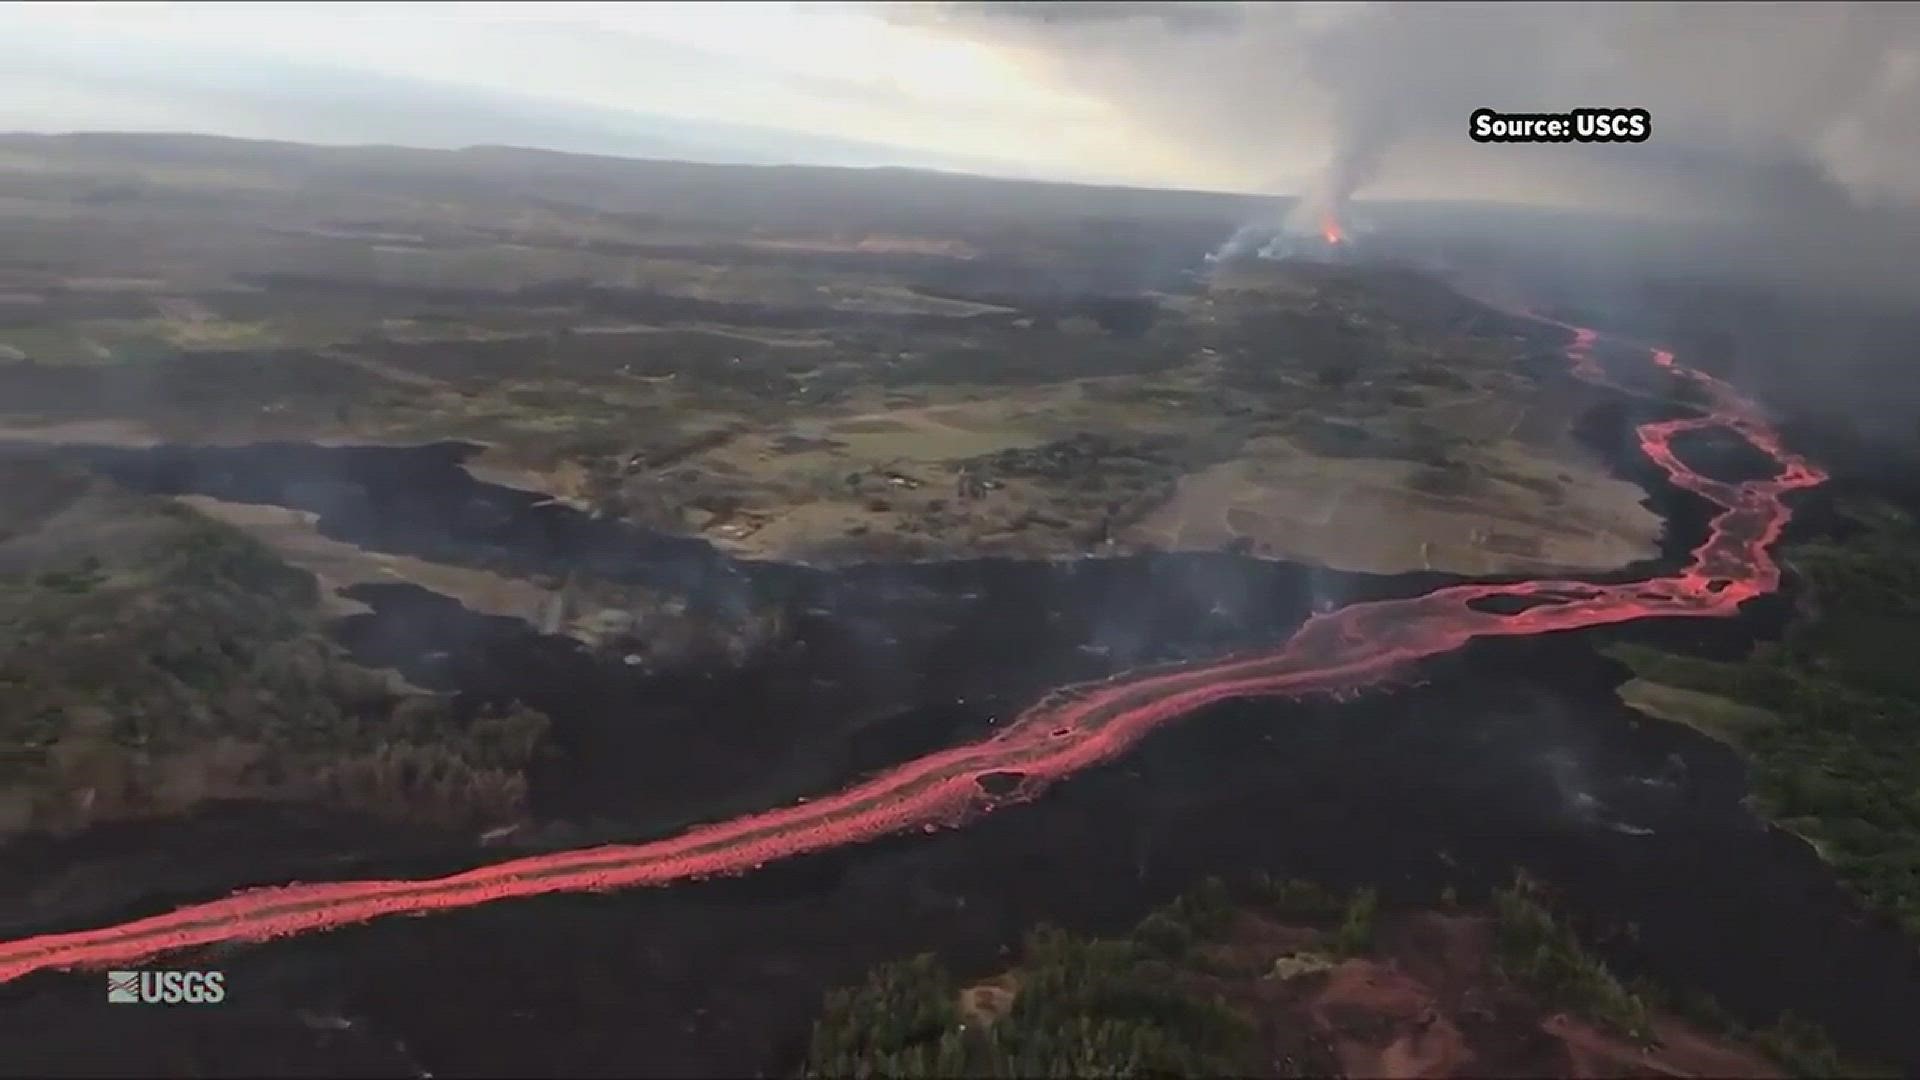 Watch as the Kilauea volcano erupts and forms a new cone.